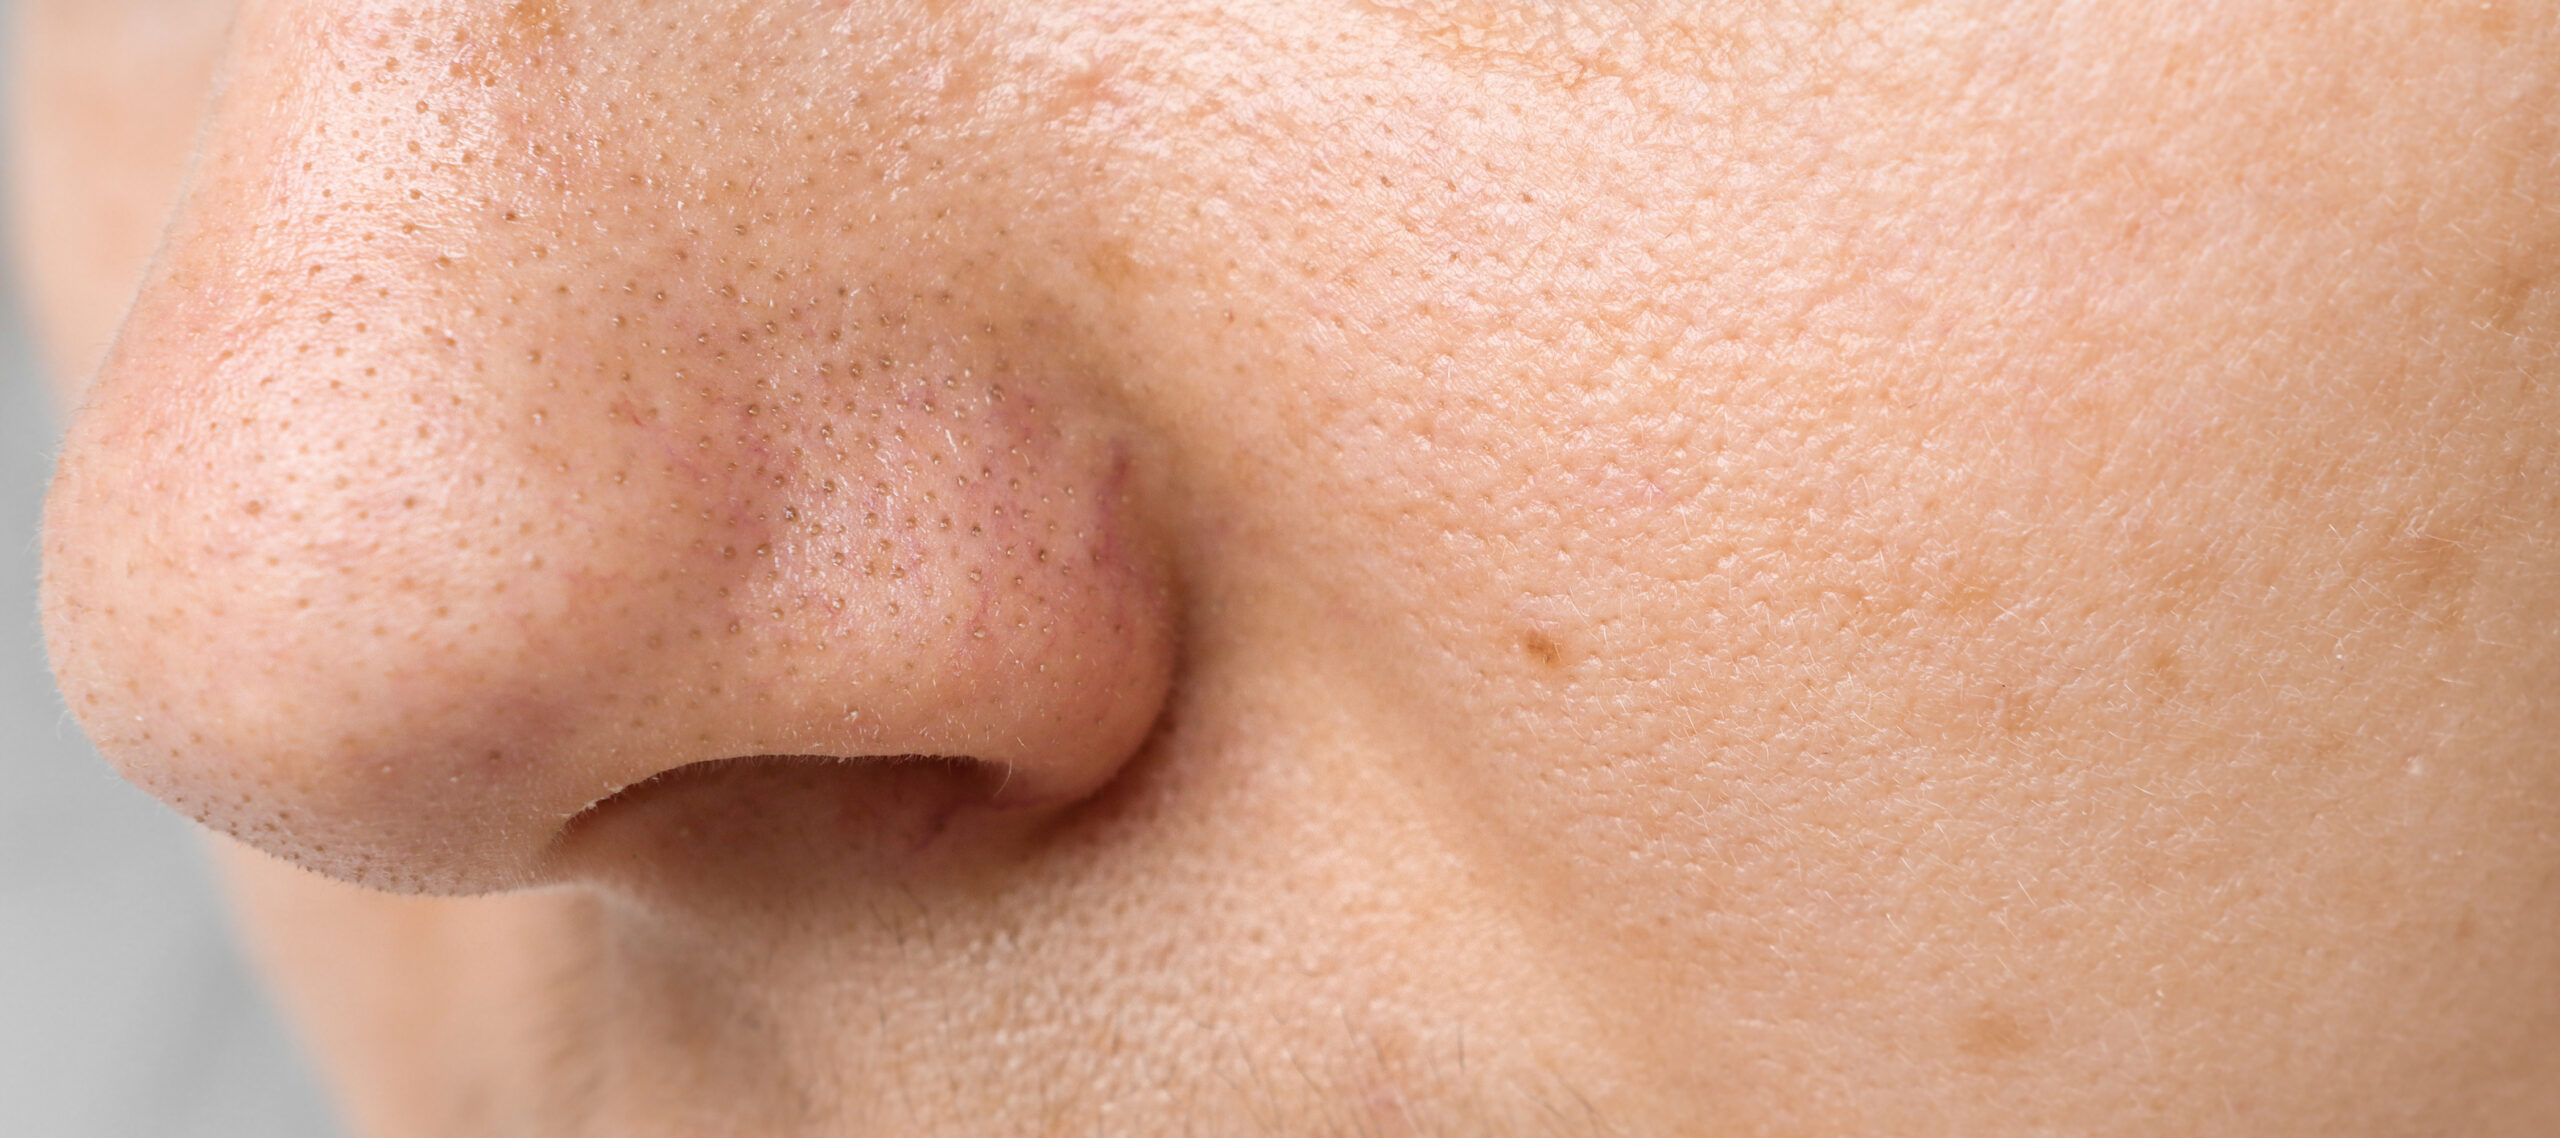 Home Remedies for Enlarged Pores